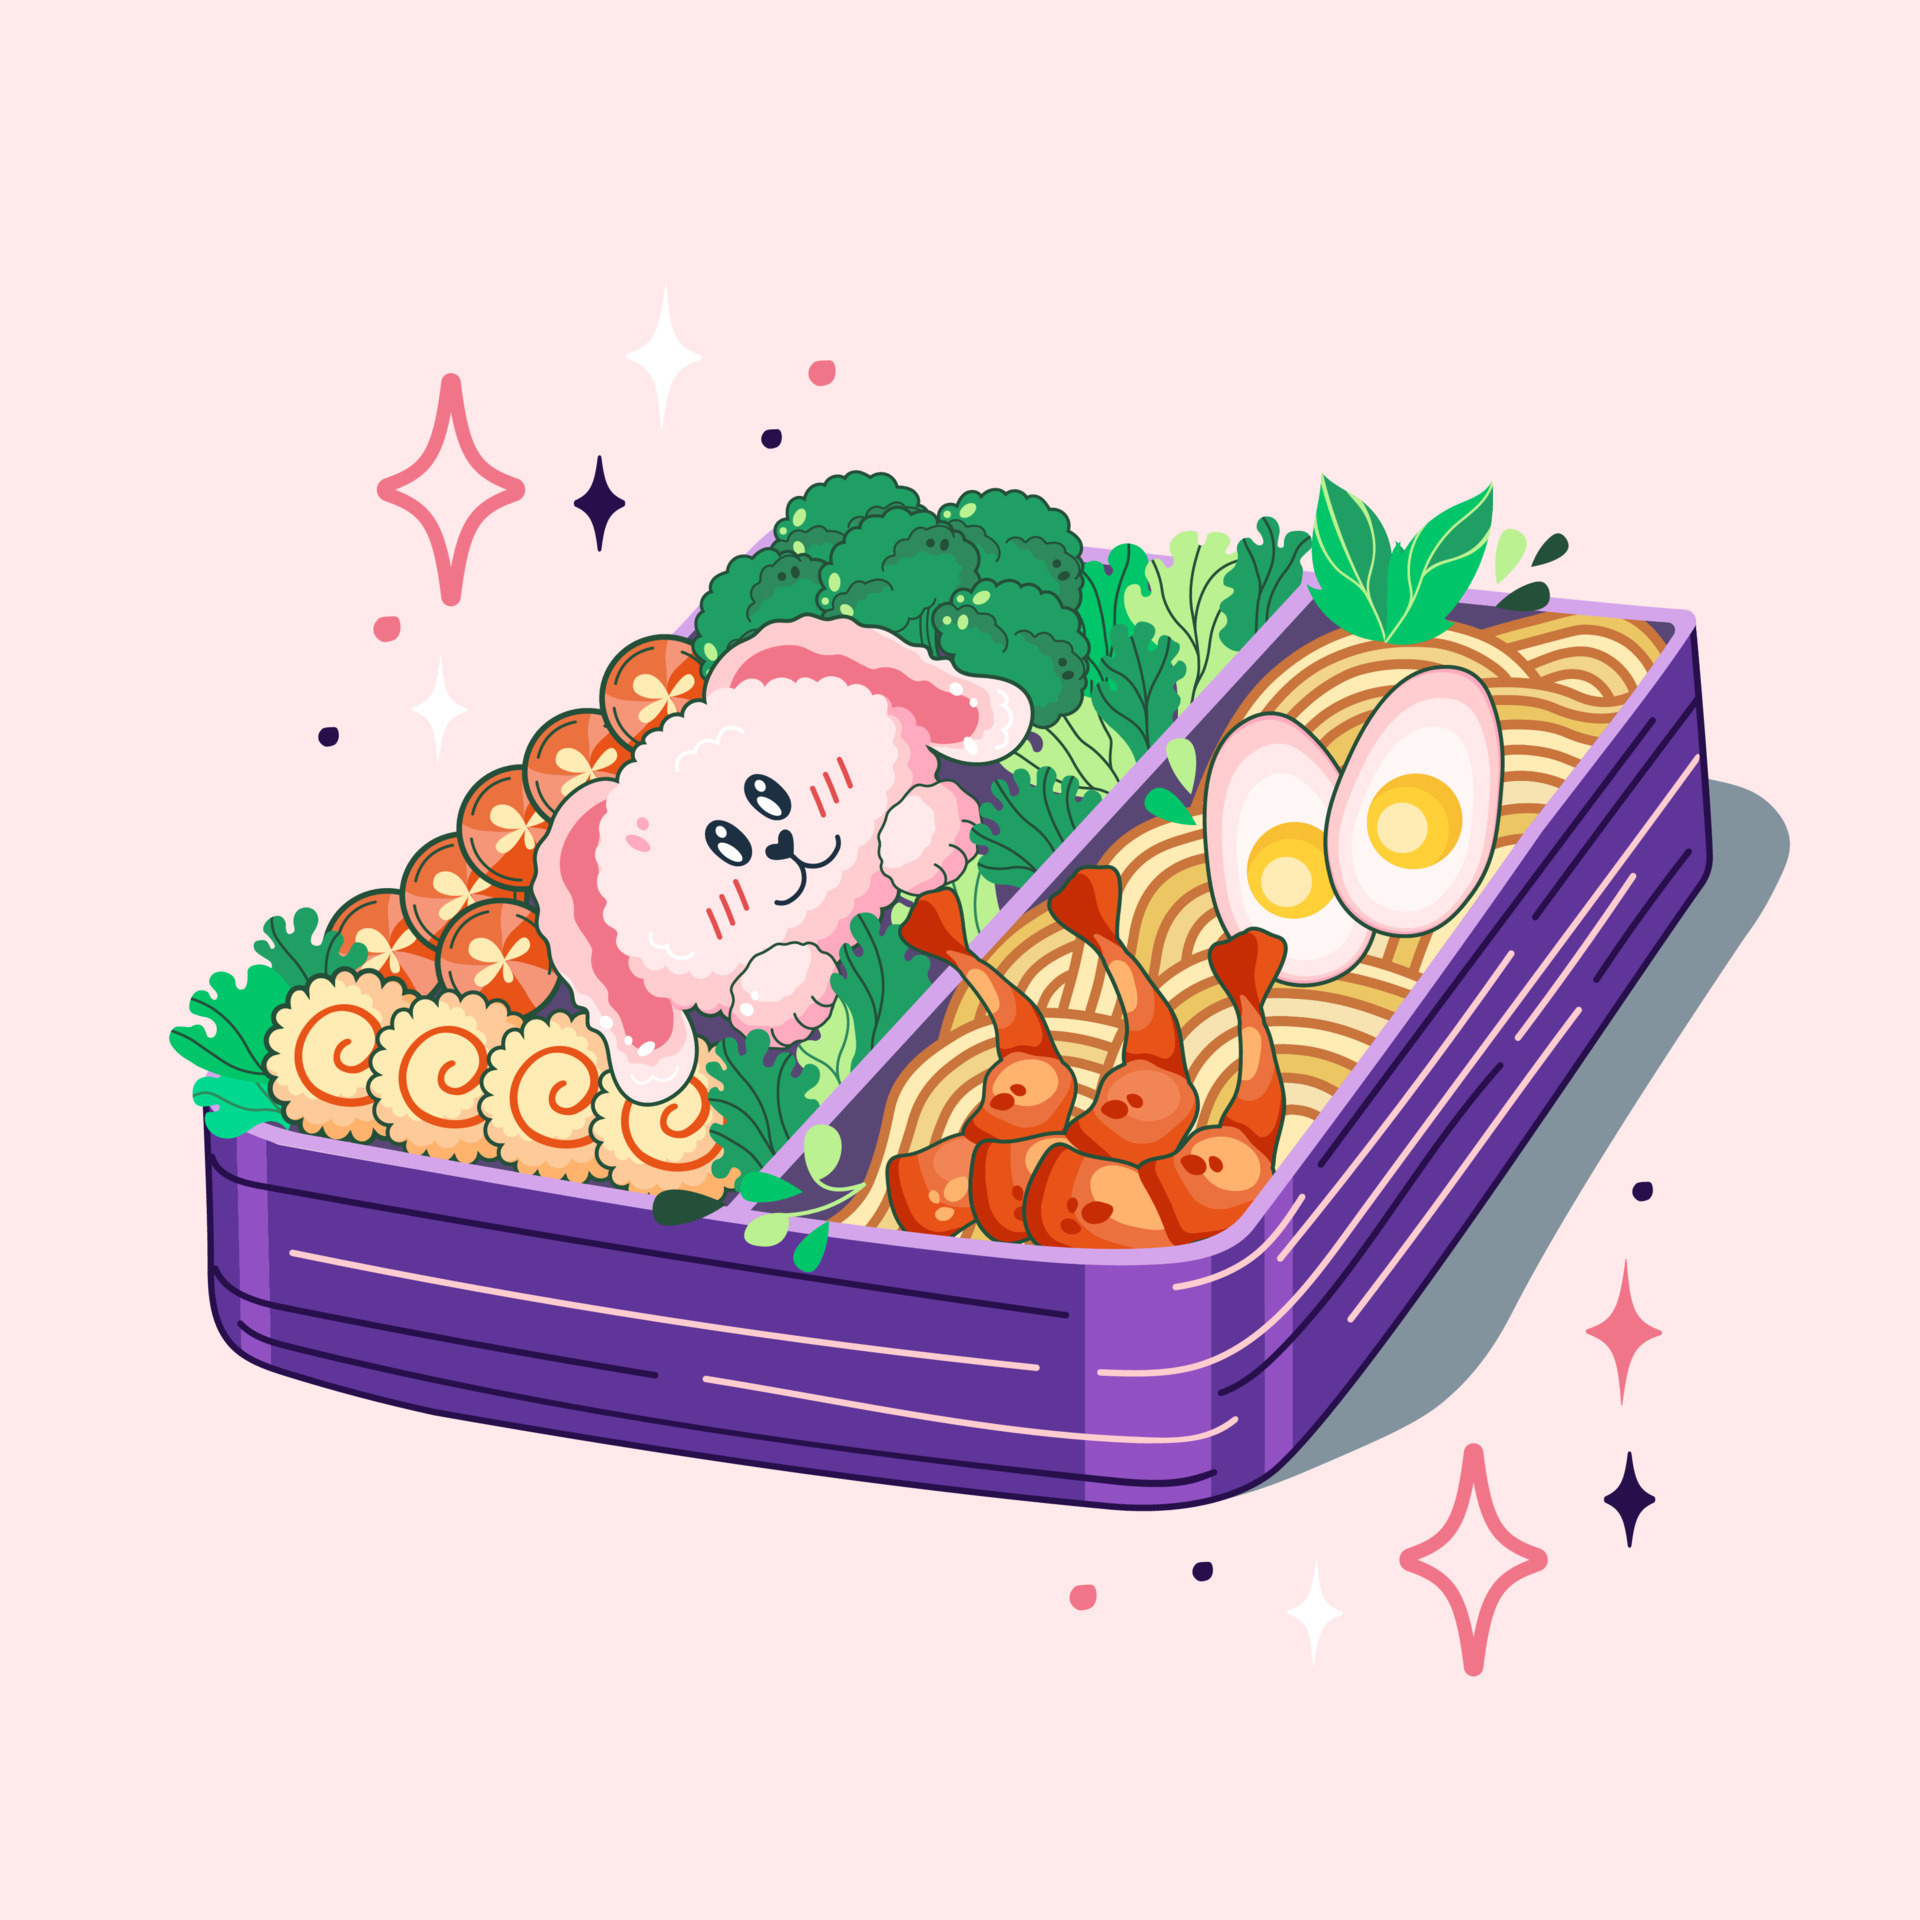 https://static.vecteezy.com/system/resources/previews/023/206/469/original/bento-box-in-kawaii-style-cute-colorful-illustration-japanese-food-in-a-lunch-box-anime-and-chibi-vector.jpg